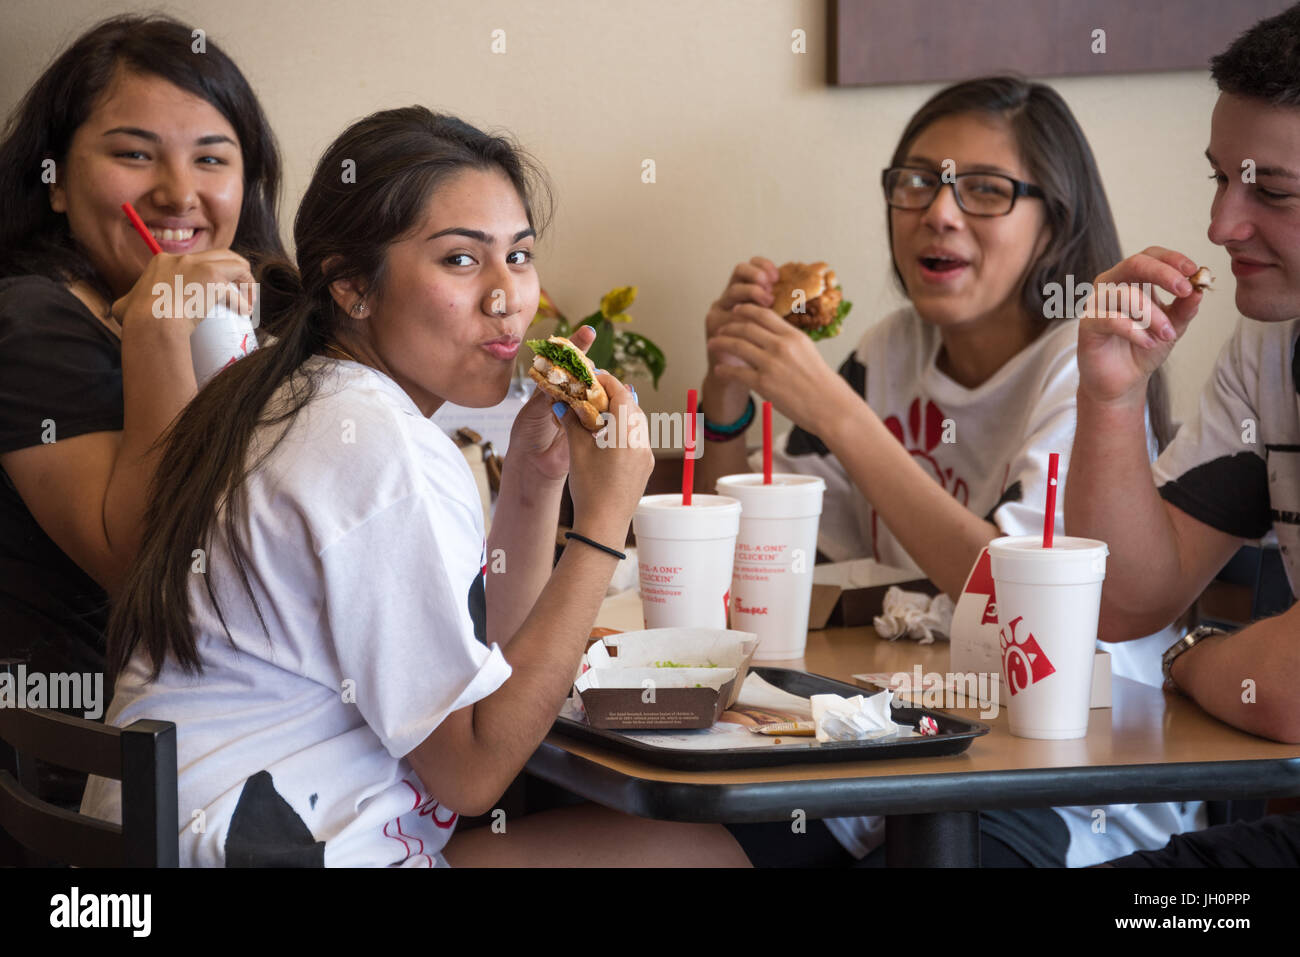 Chick-fil-A fans enjoying a meal with friends on Cow Appreciation Day at Chick-fil-A, America's top-rated fast food restaurant. Stock Photo